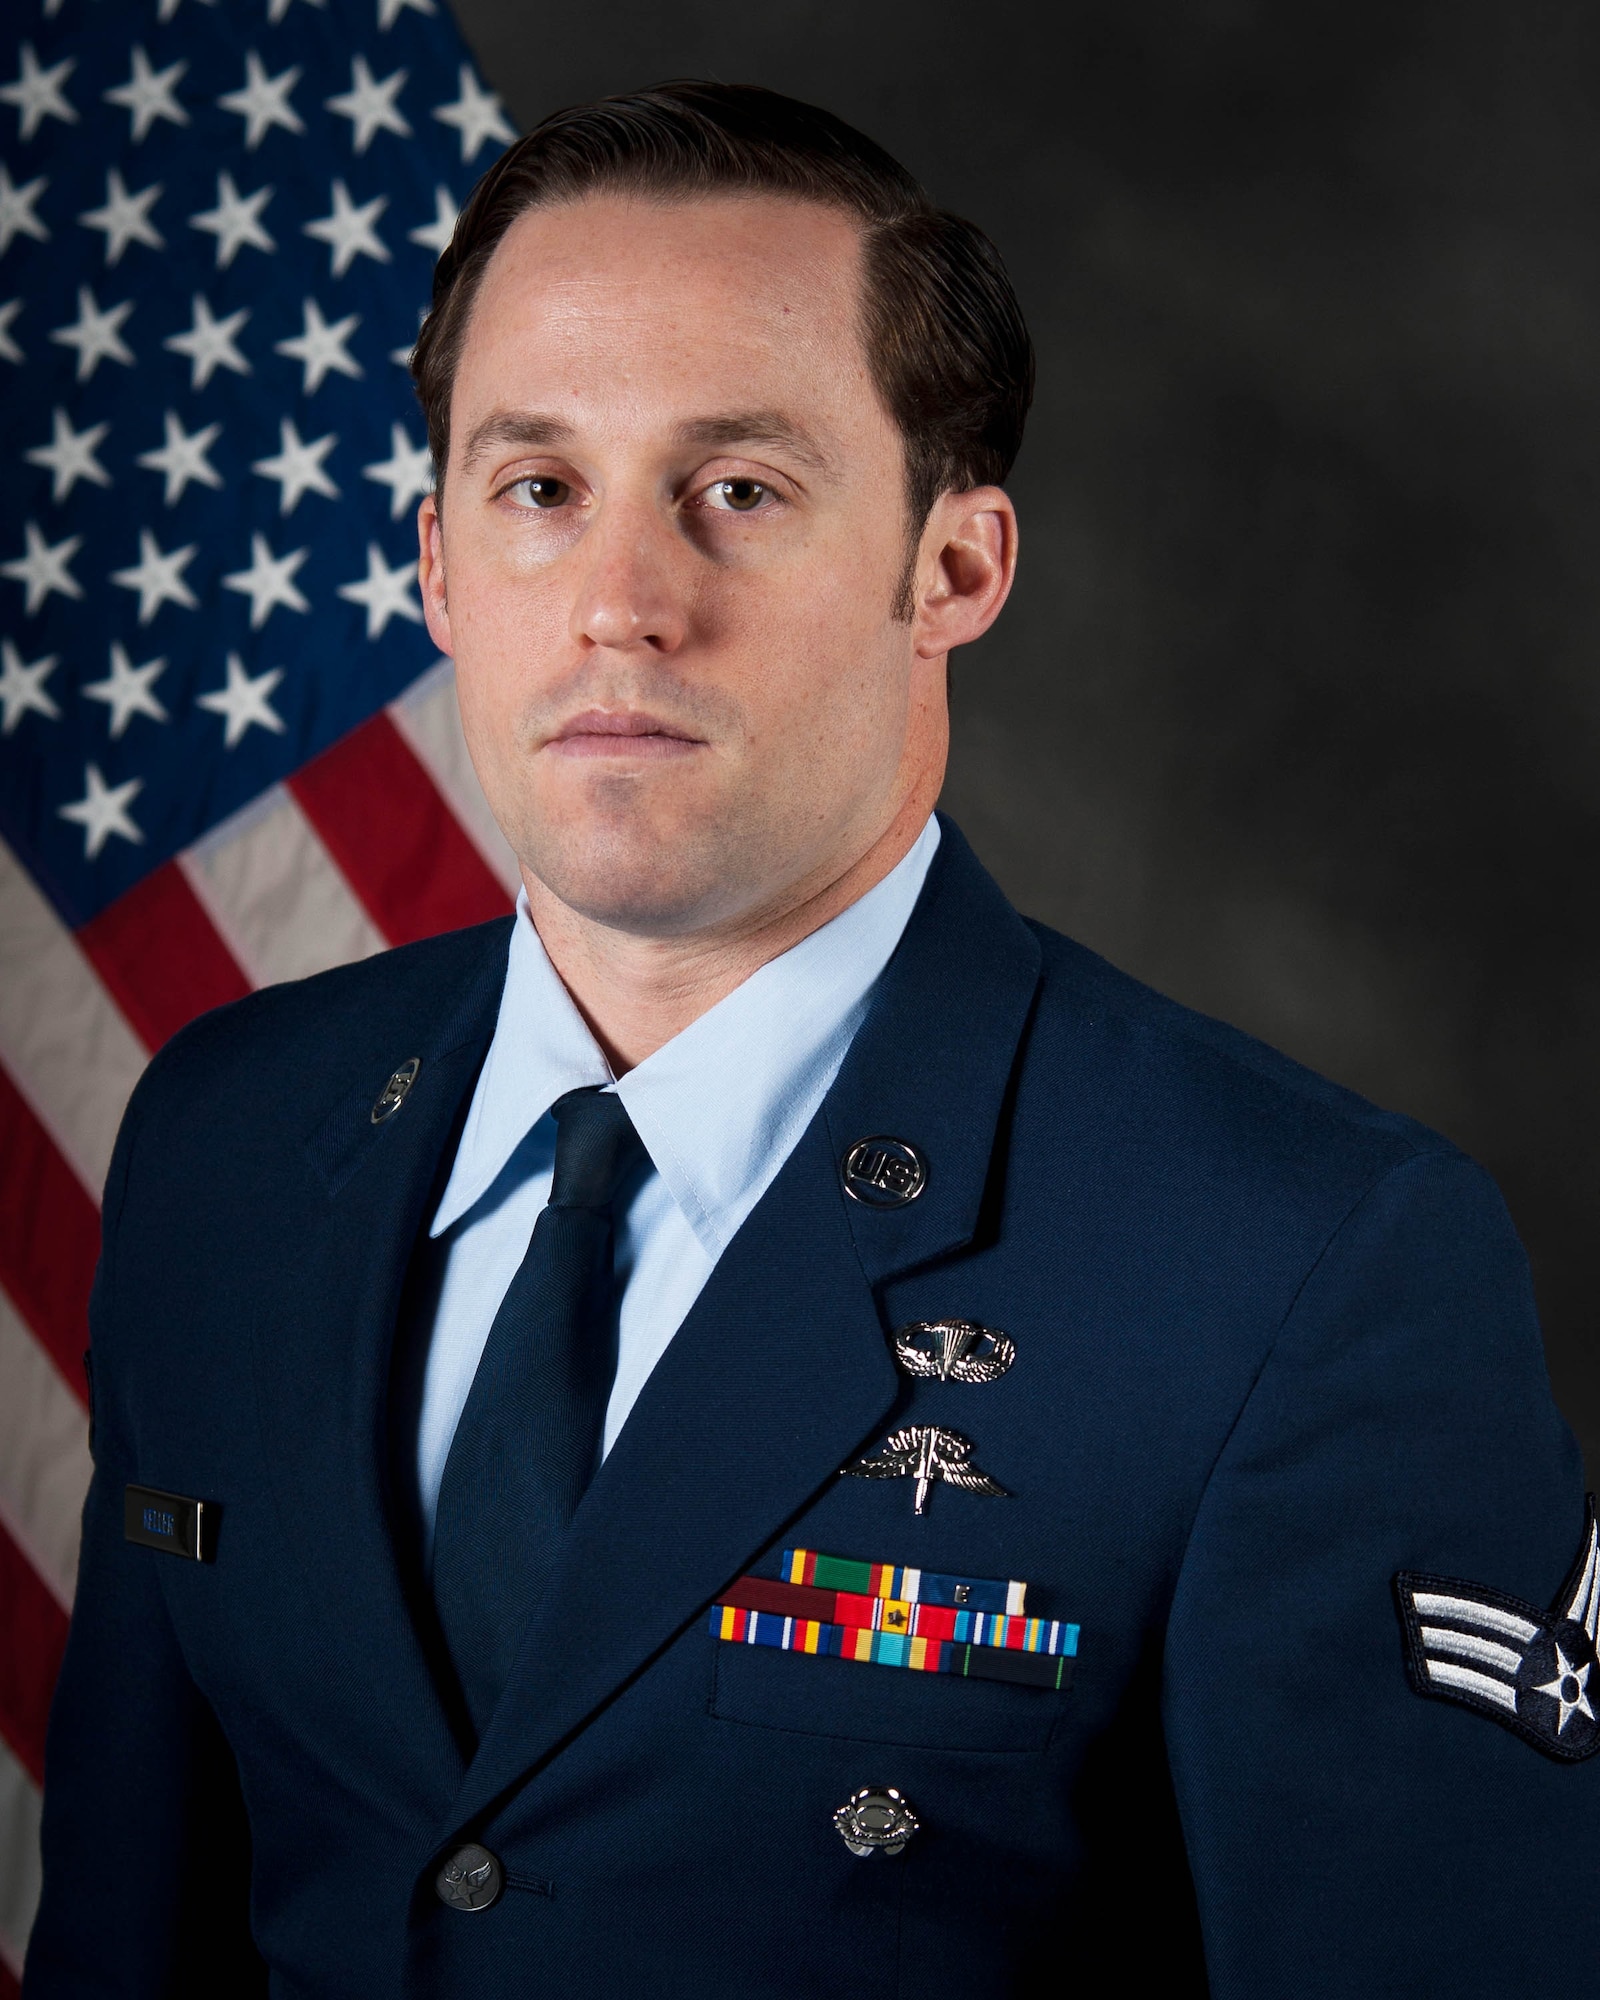 Newly promoted Staff Sgt. Daniel Keller of the 123rd Special Tactics Squadron has been selected as the Kentucky Air National Guard's 2016 Airman of the Year.